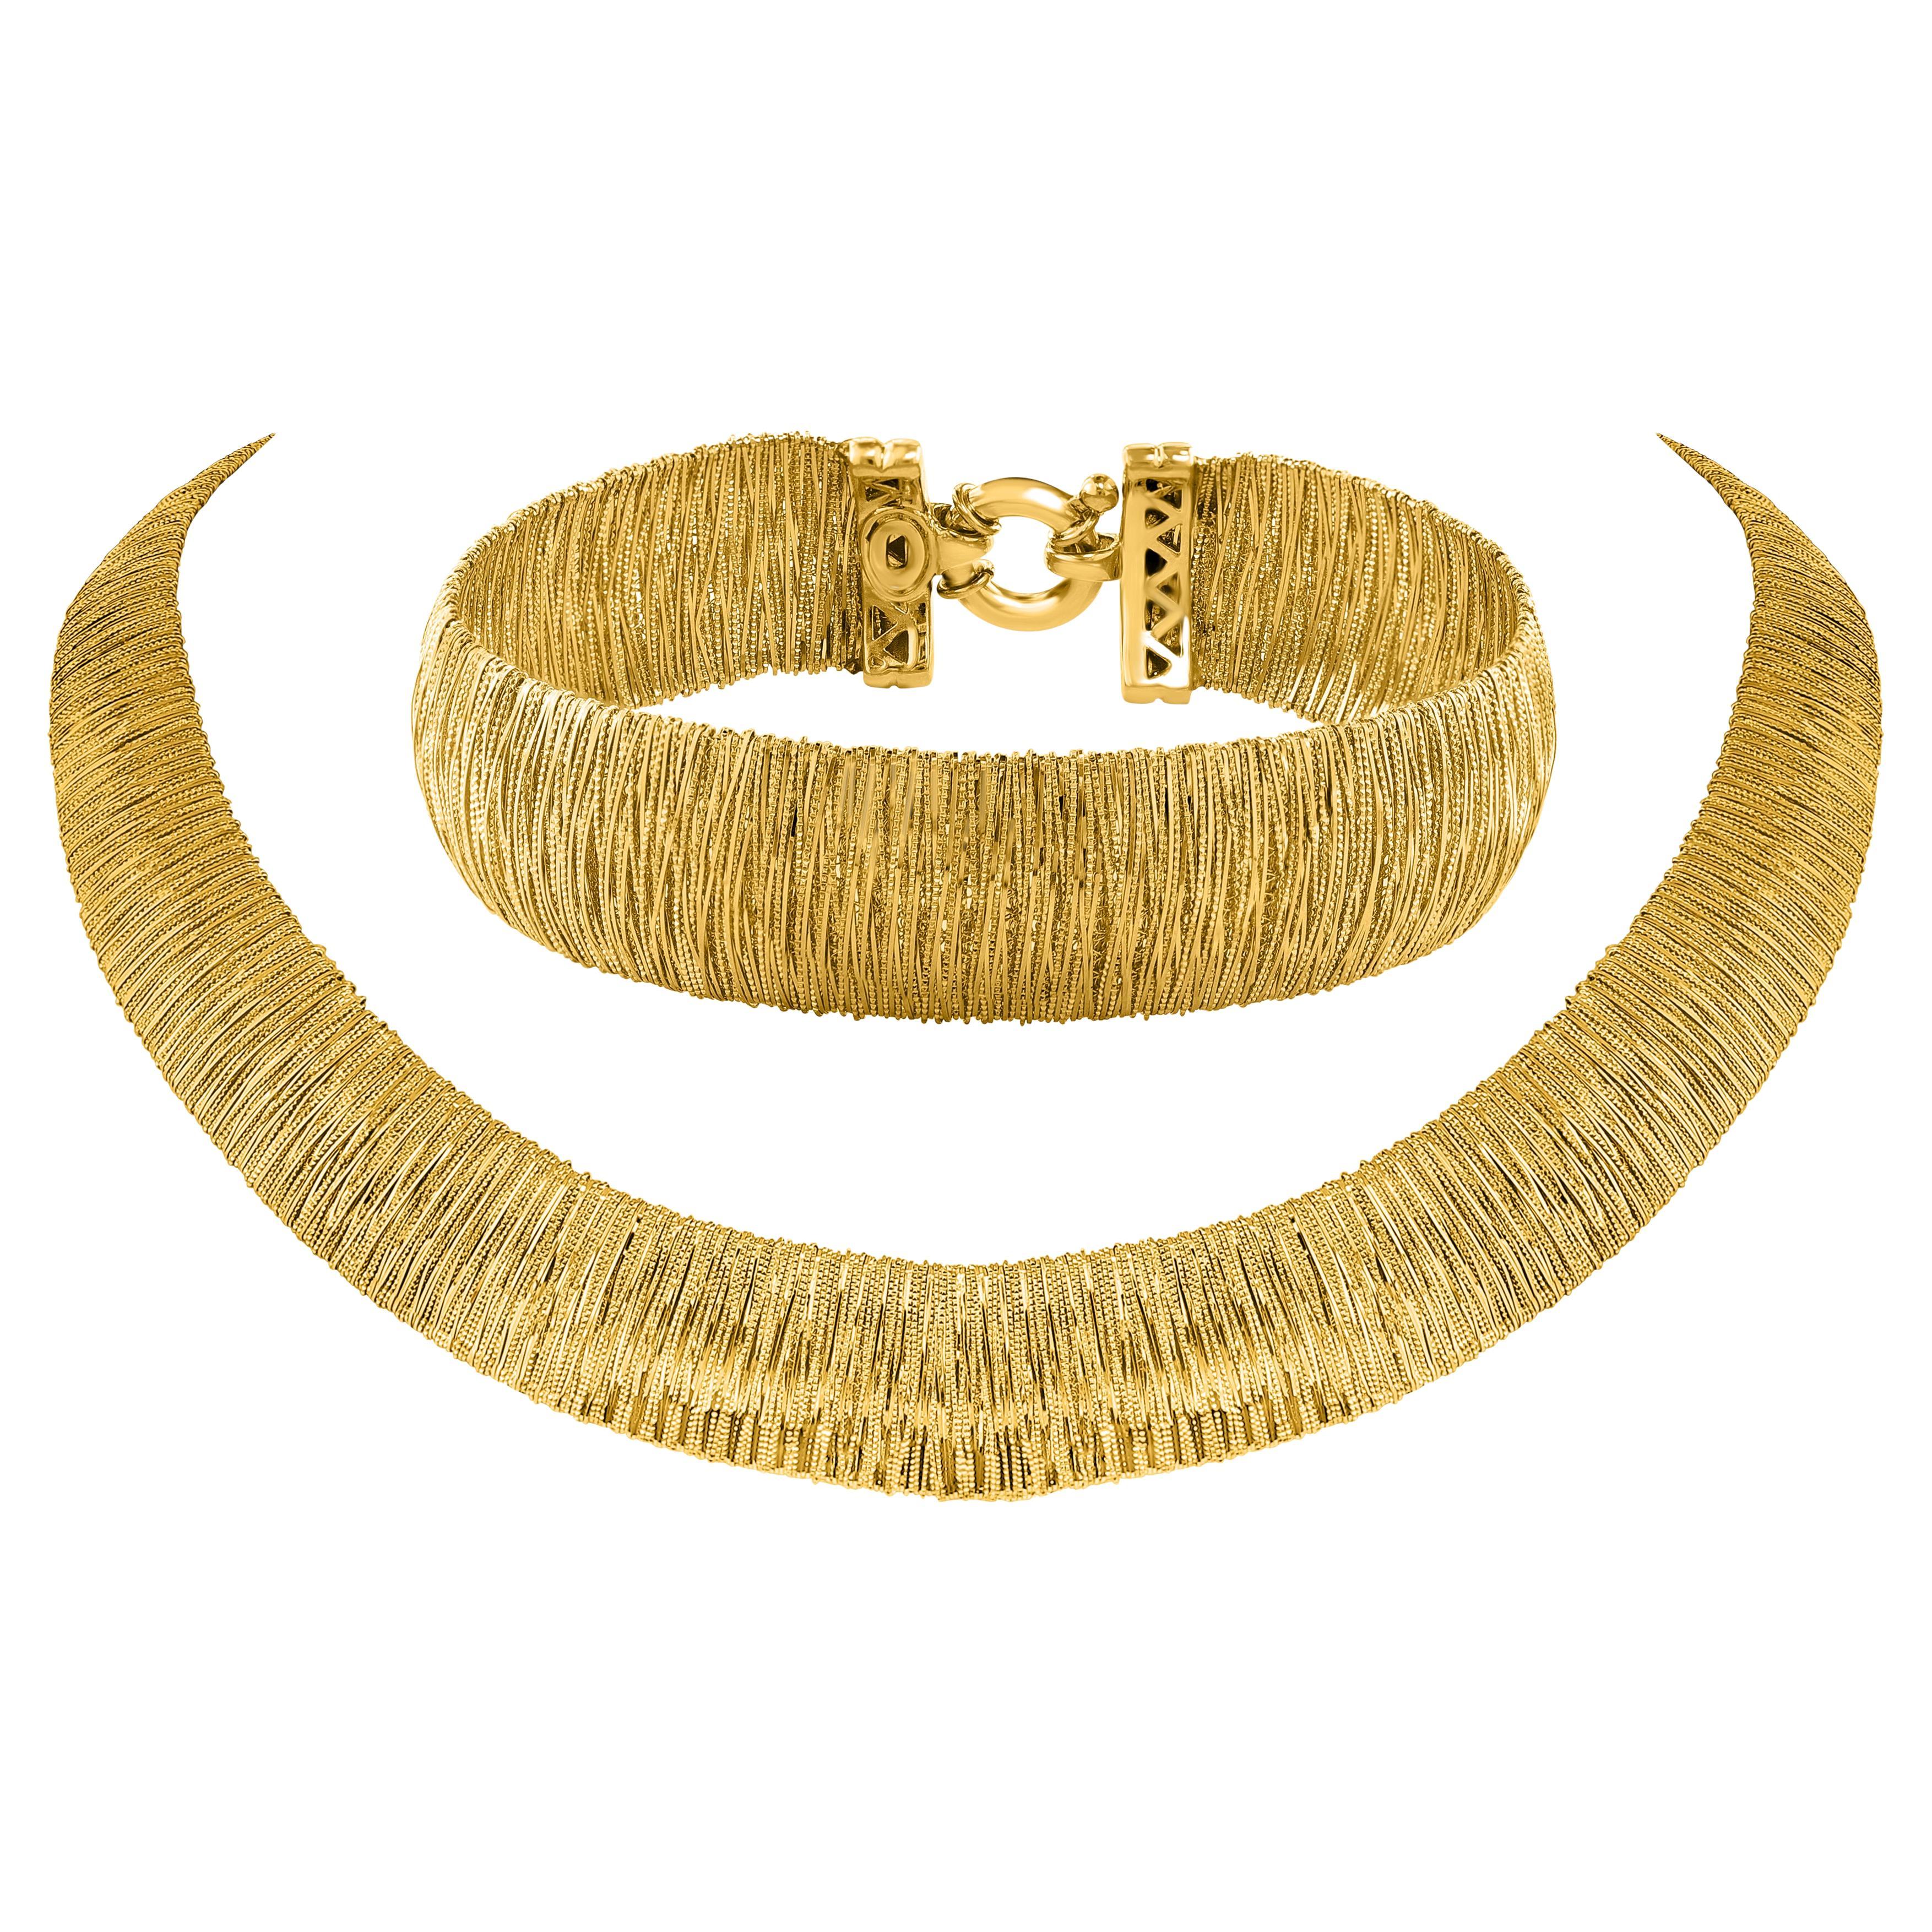 Solid 18Kt Yellow Gold Cleopatra Collar Bib Necklace Choker & Bracelet 68gm  For Sale